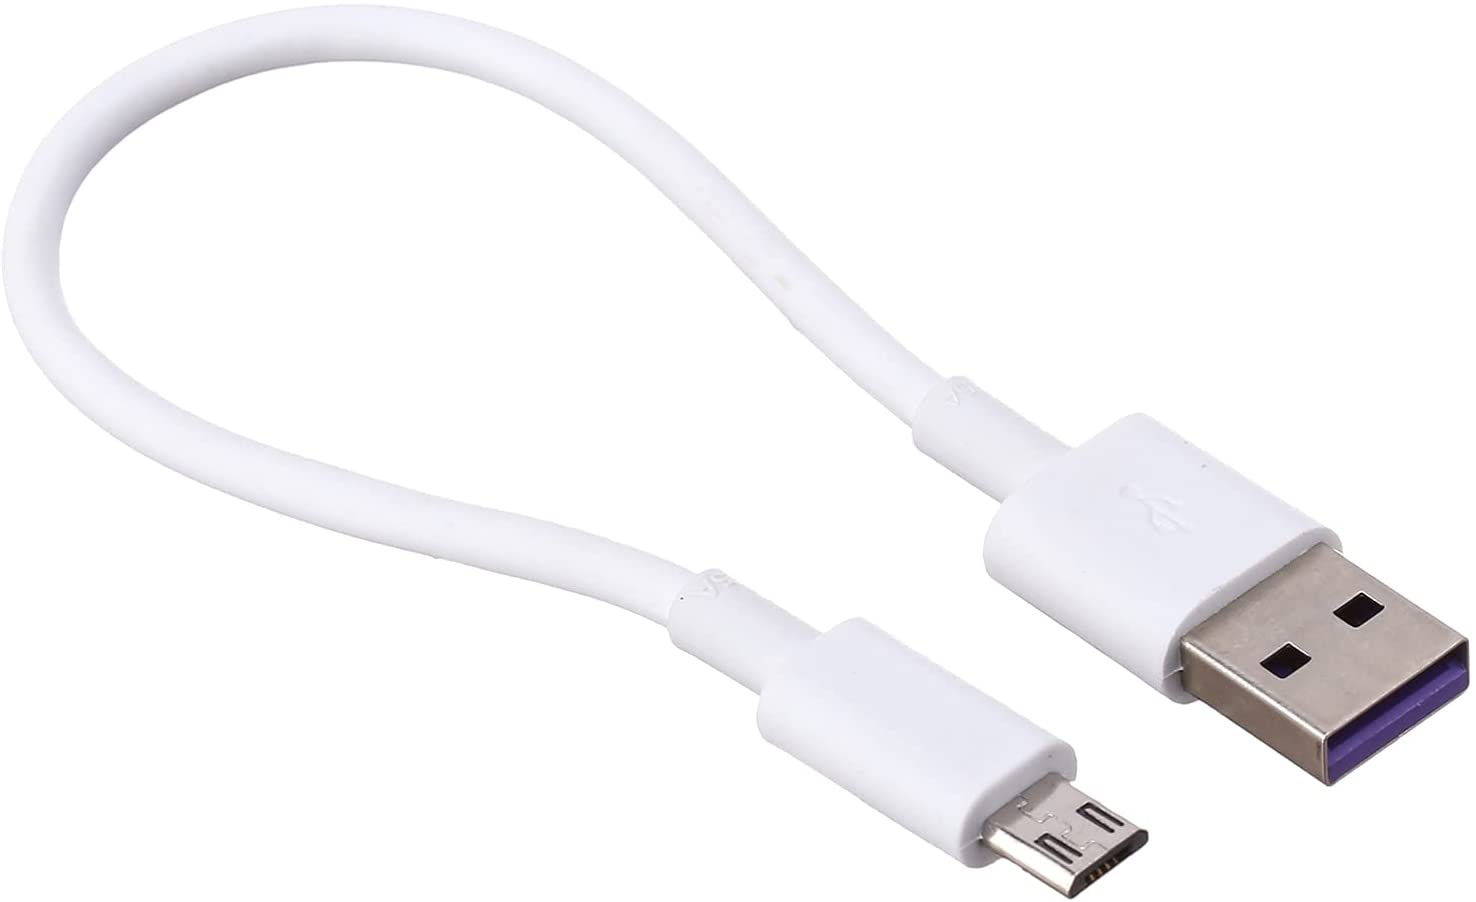 Keendex Micro USB Charging Cable Cable, 10Cm, White- Kx2395